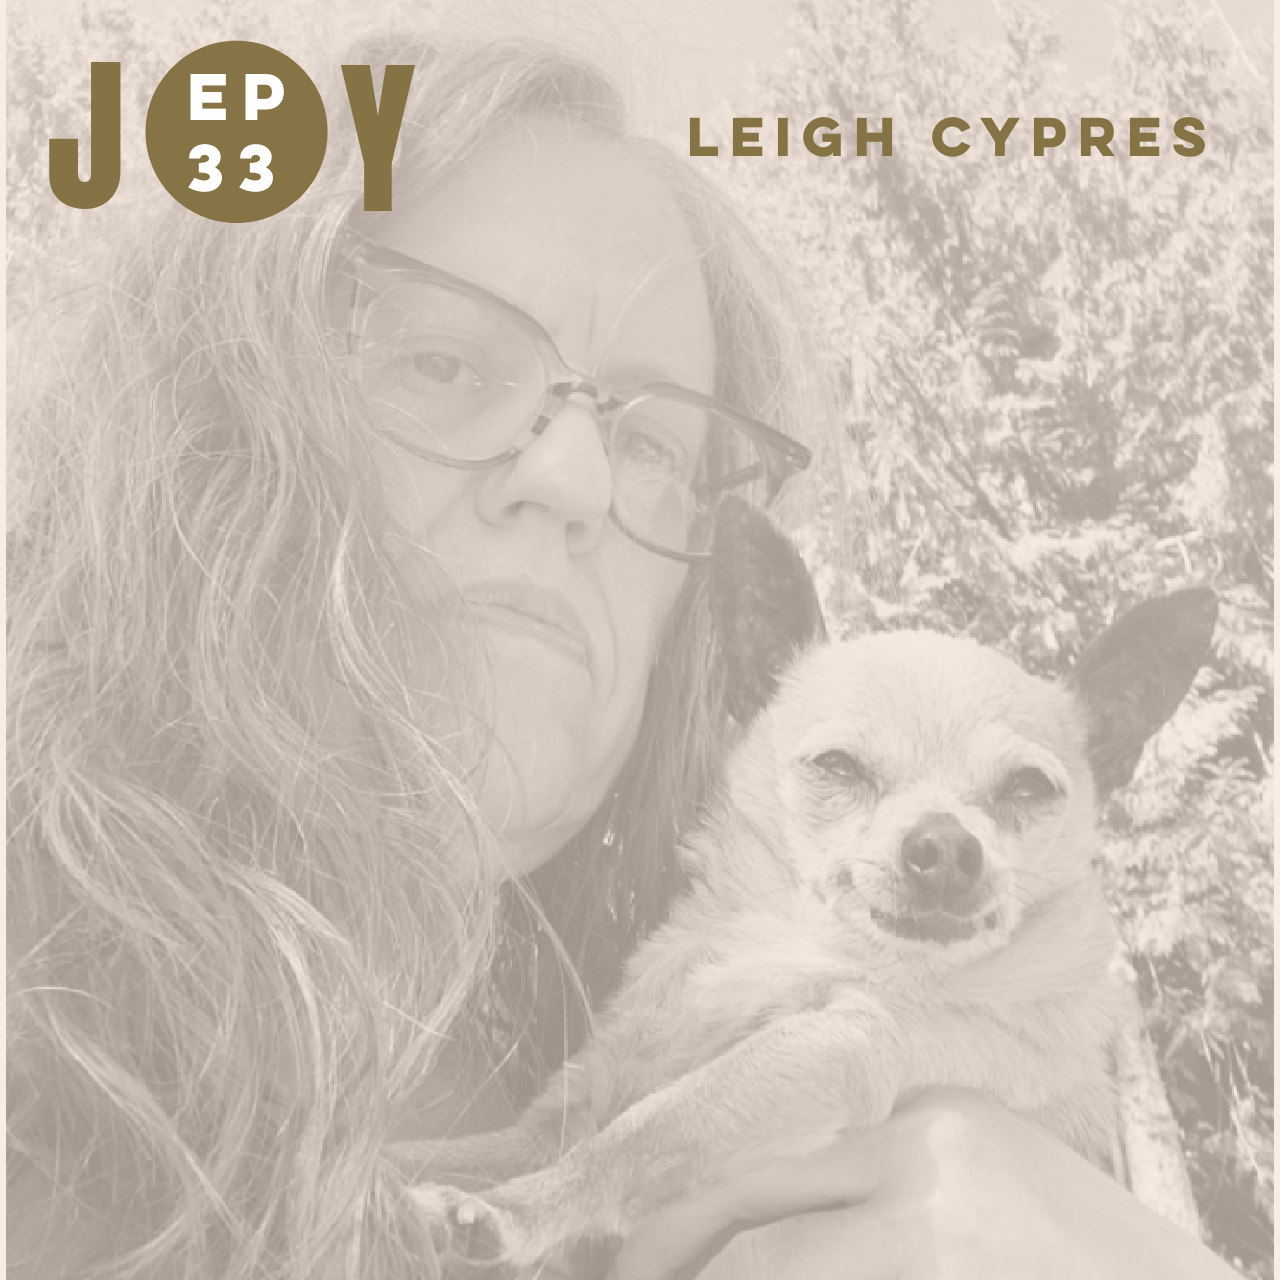 JOY IS NOW: LET'S TALK GRIEF + PET LOSS WITH LEIGH CYPRES